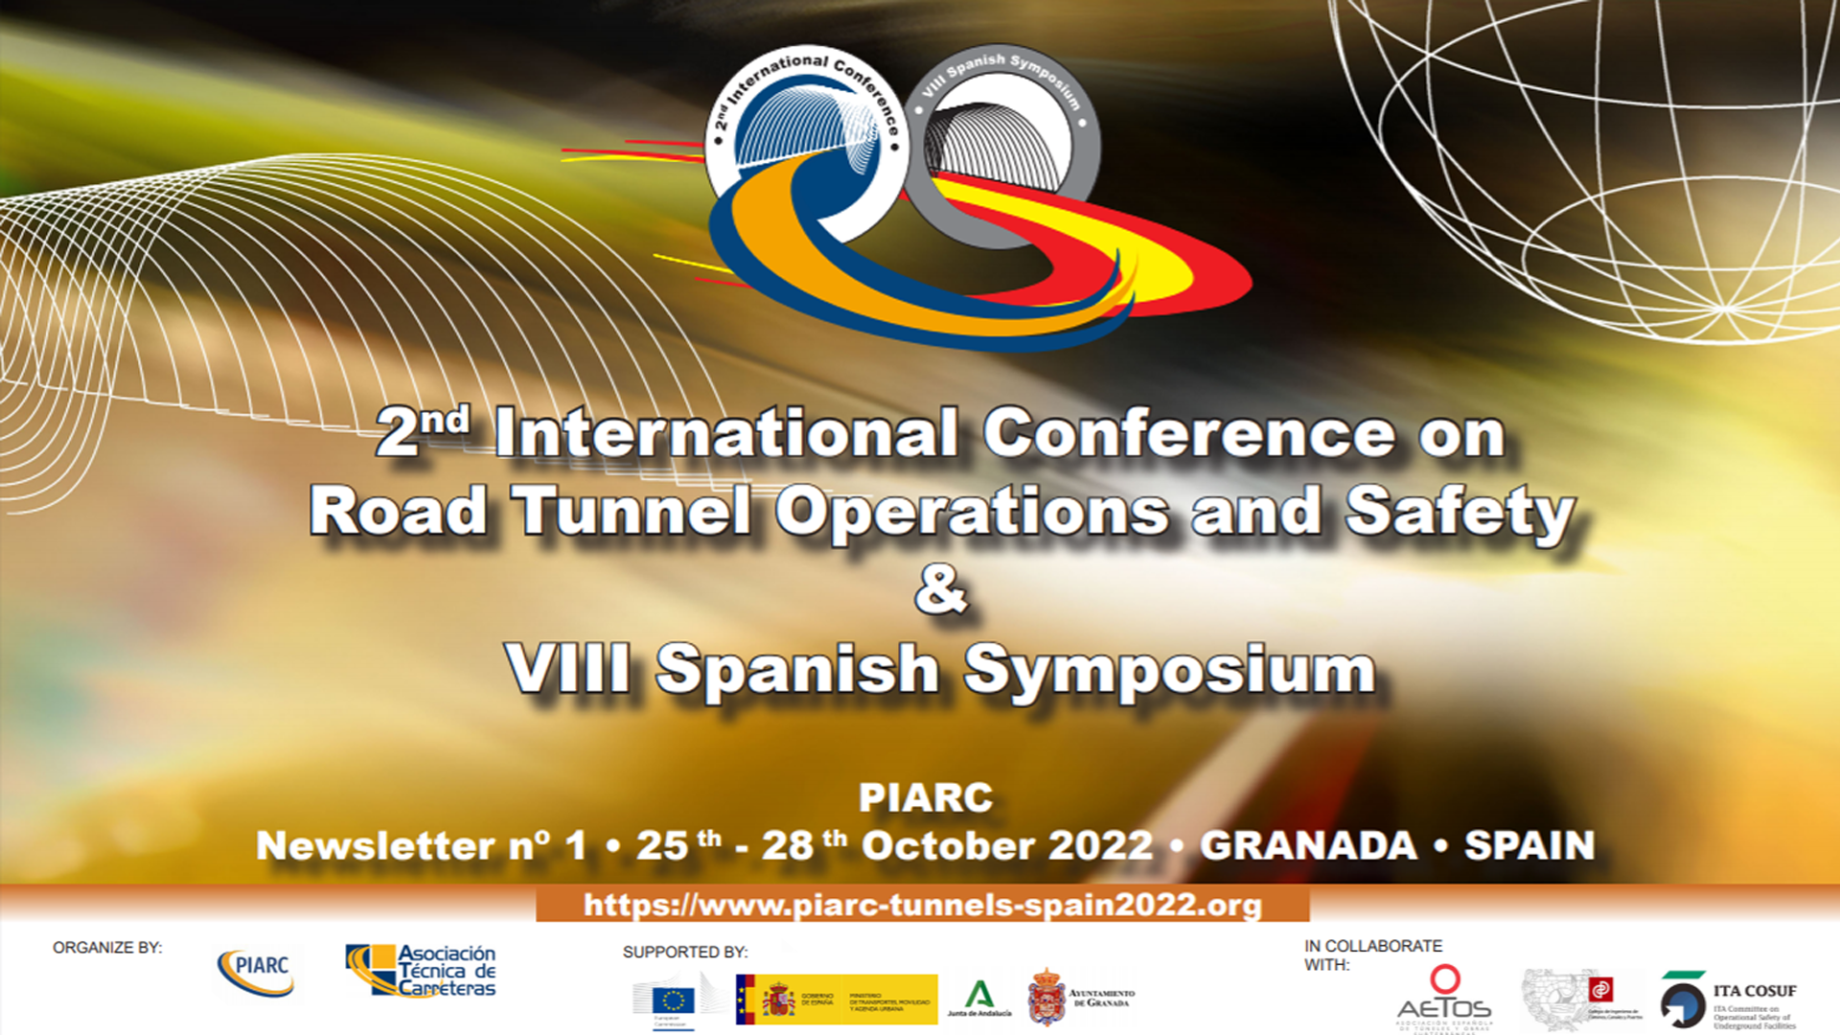 Share your knowledge on tunnel operations and send in
your paper for the 2nd International Conference on Road Tunnel
Operations and Safety and the VIII Spanish Tunnels Symposium!